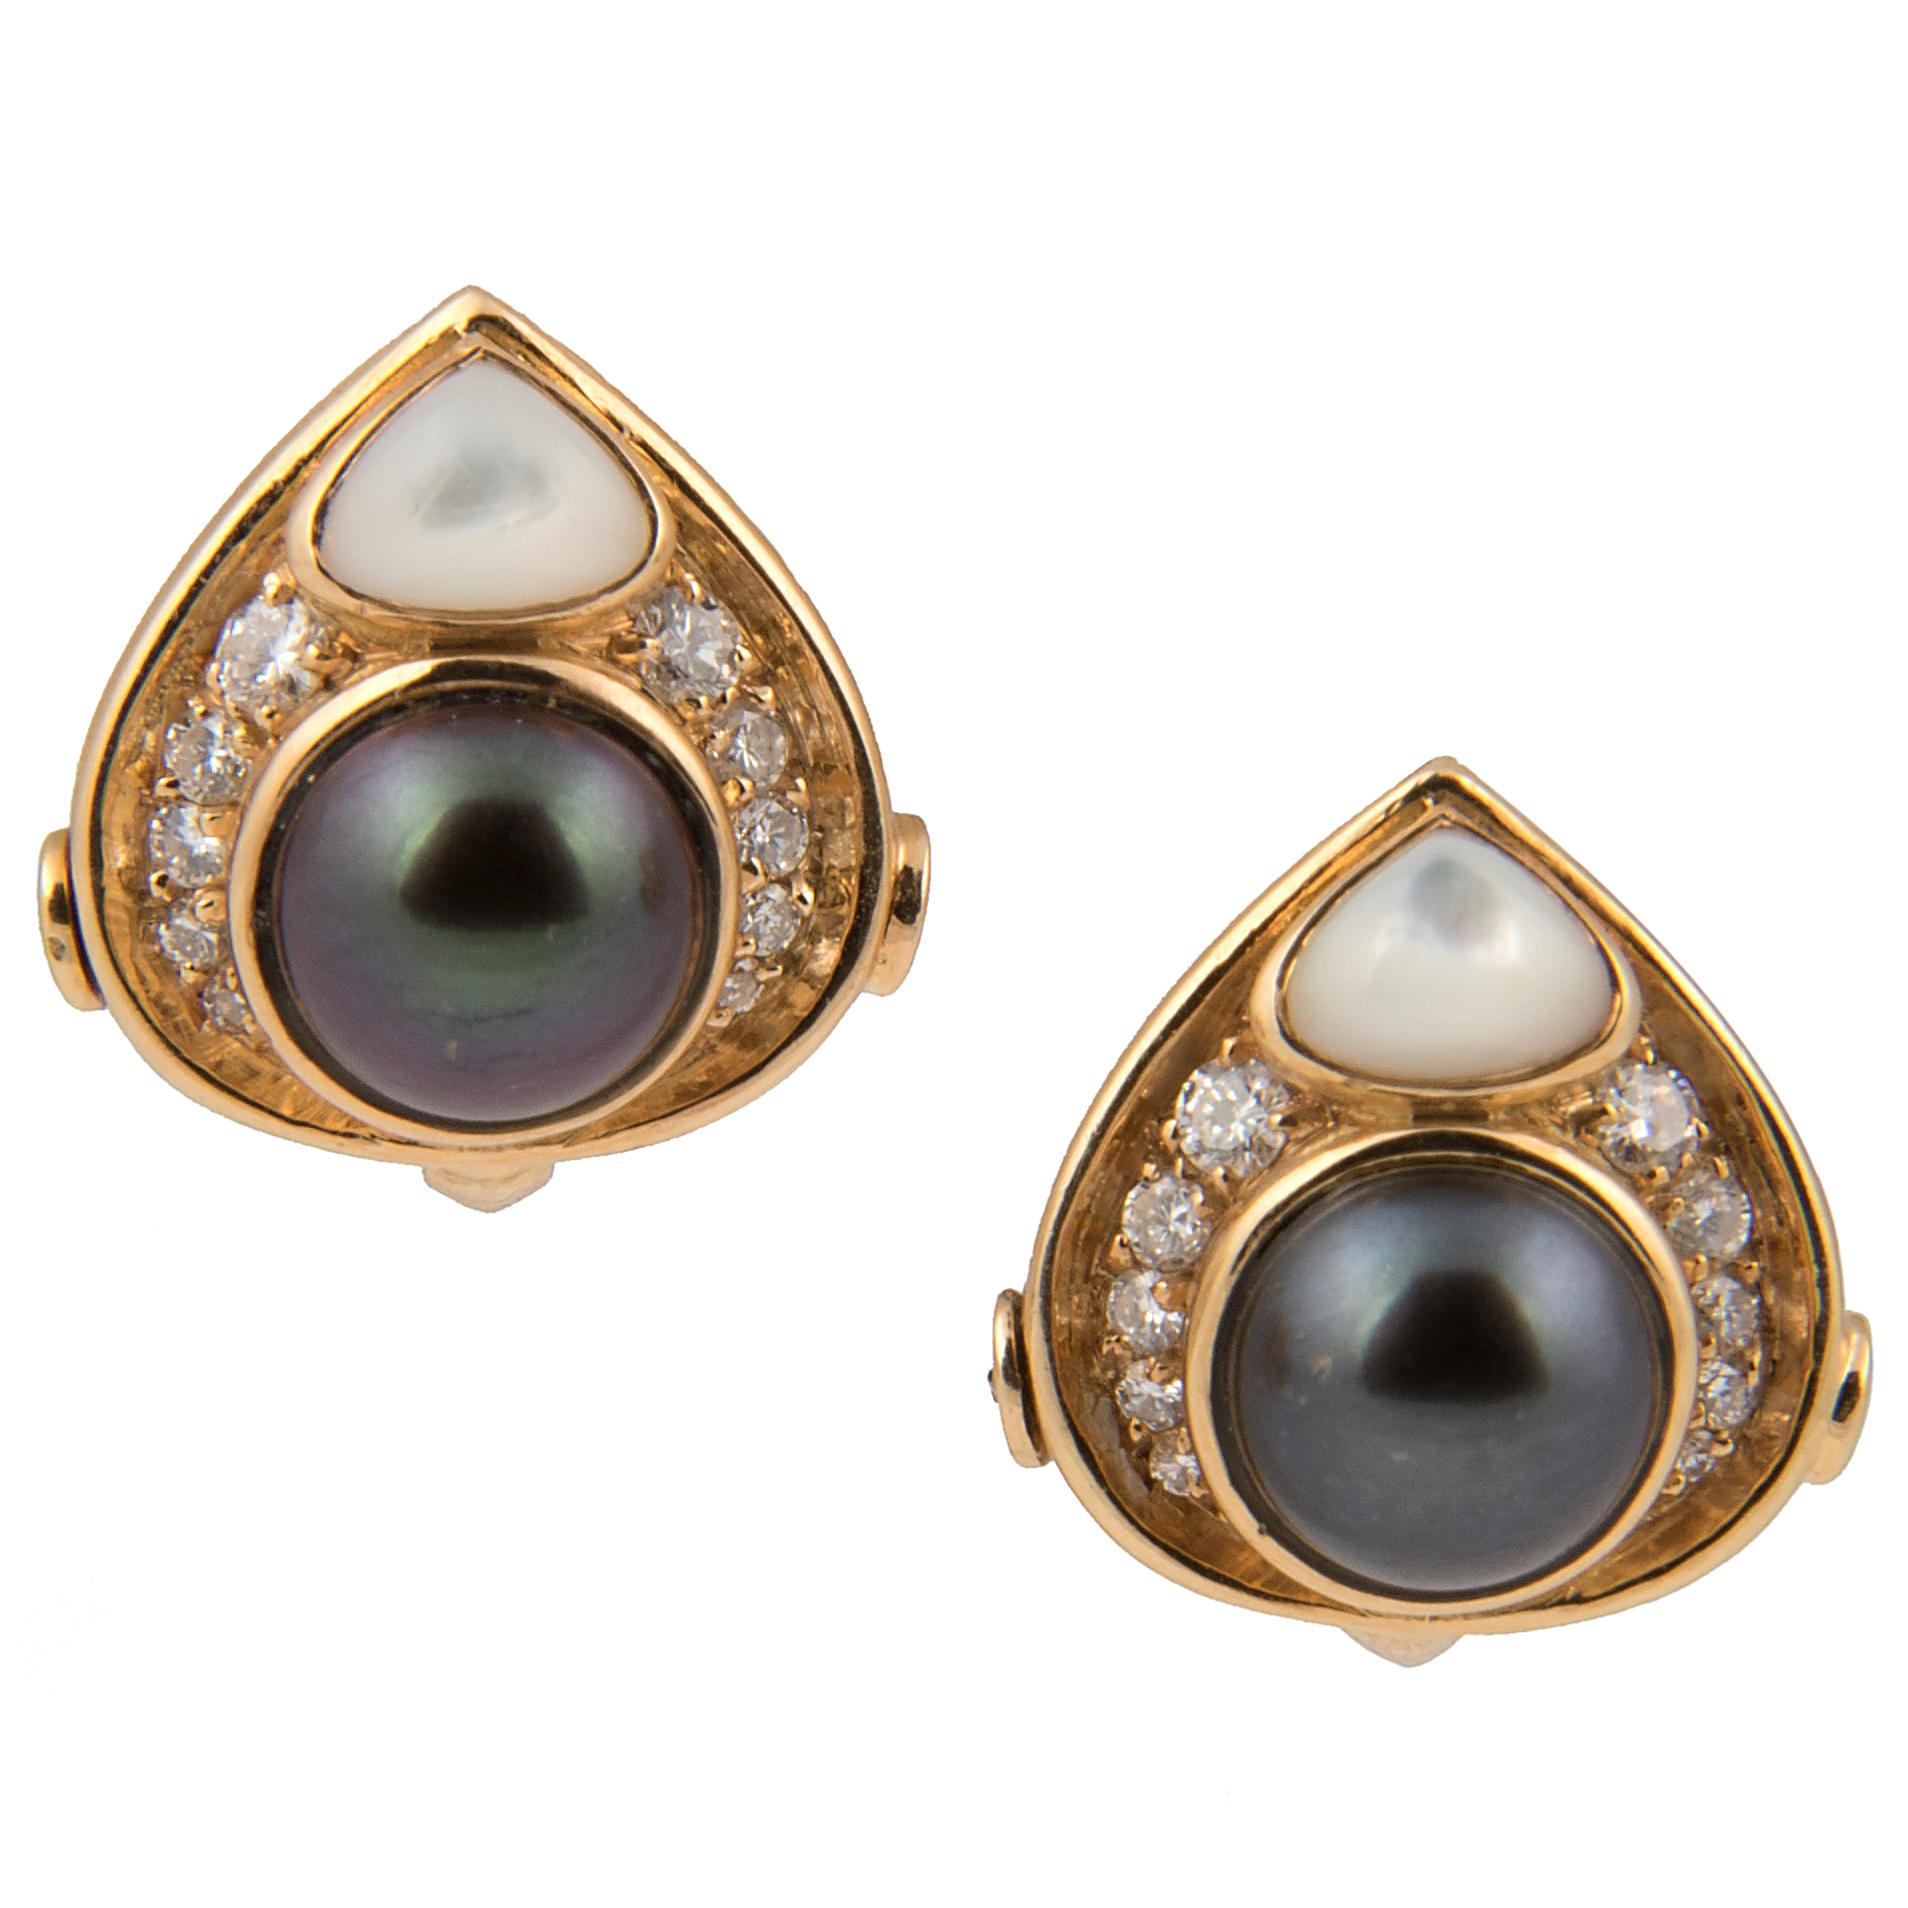 Pair of clip earrings called 'Pneus Perles' designed by Marina B, 18kt yellow gold, pavé set diamonds, black and white mother of pearl and Mabé cultured pearl. The earrings can be worn as pendant earrings or as studs.
Signed Marina B,  dated 1981,